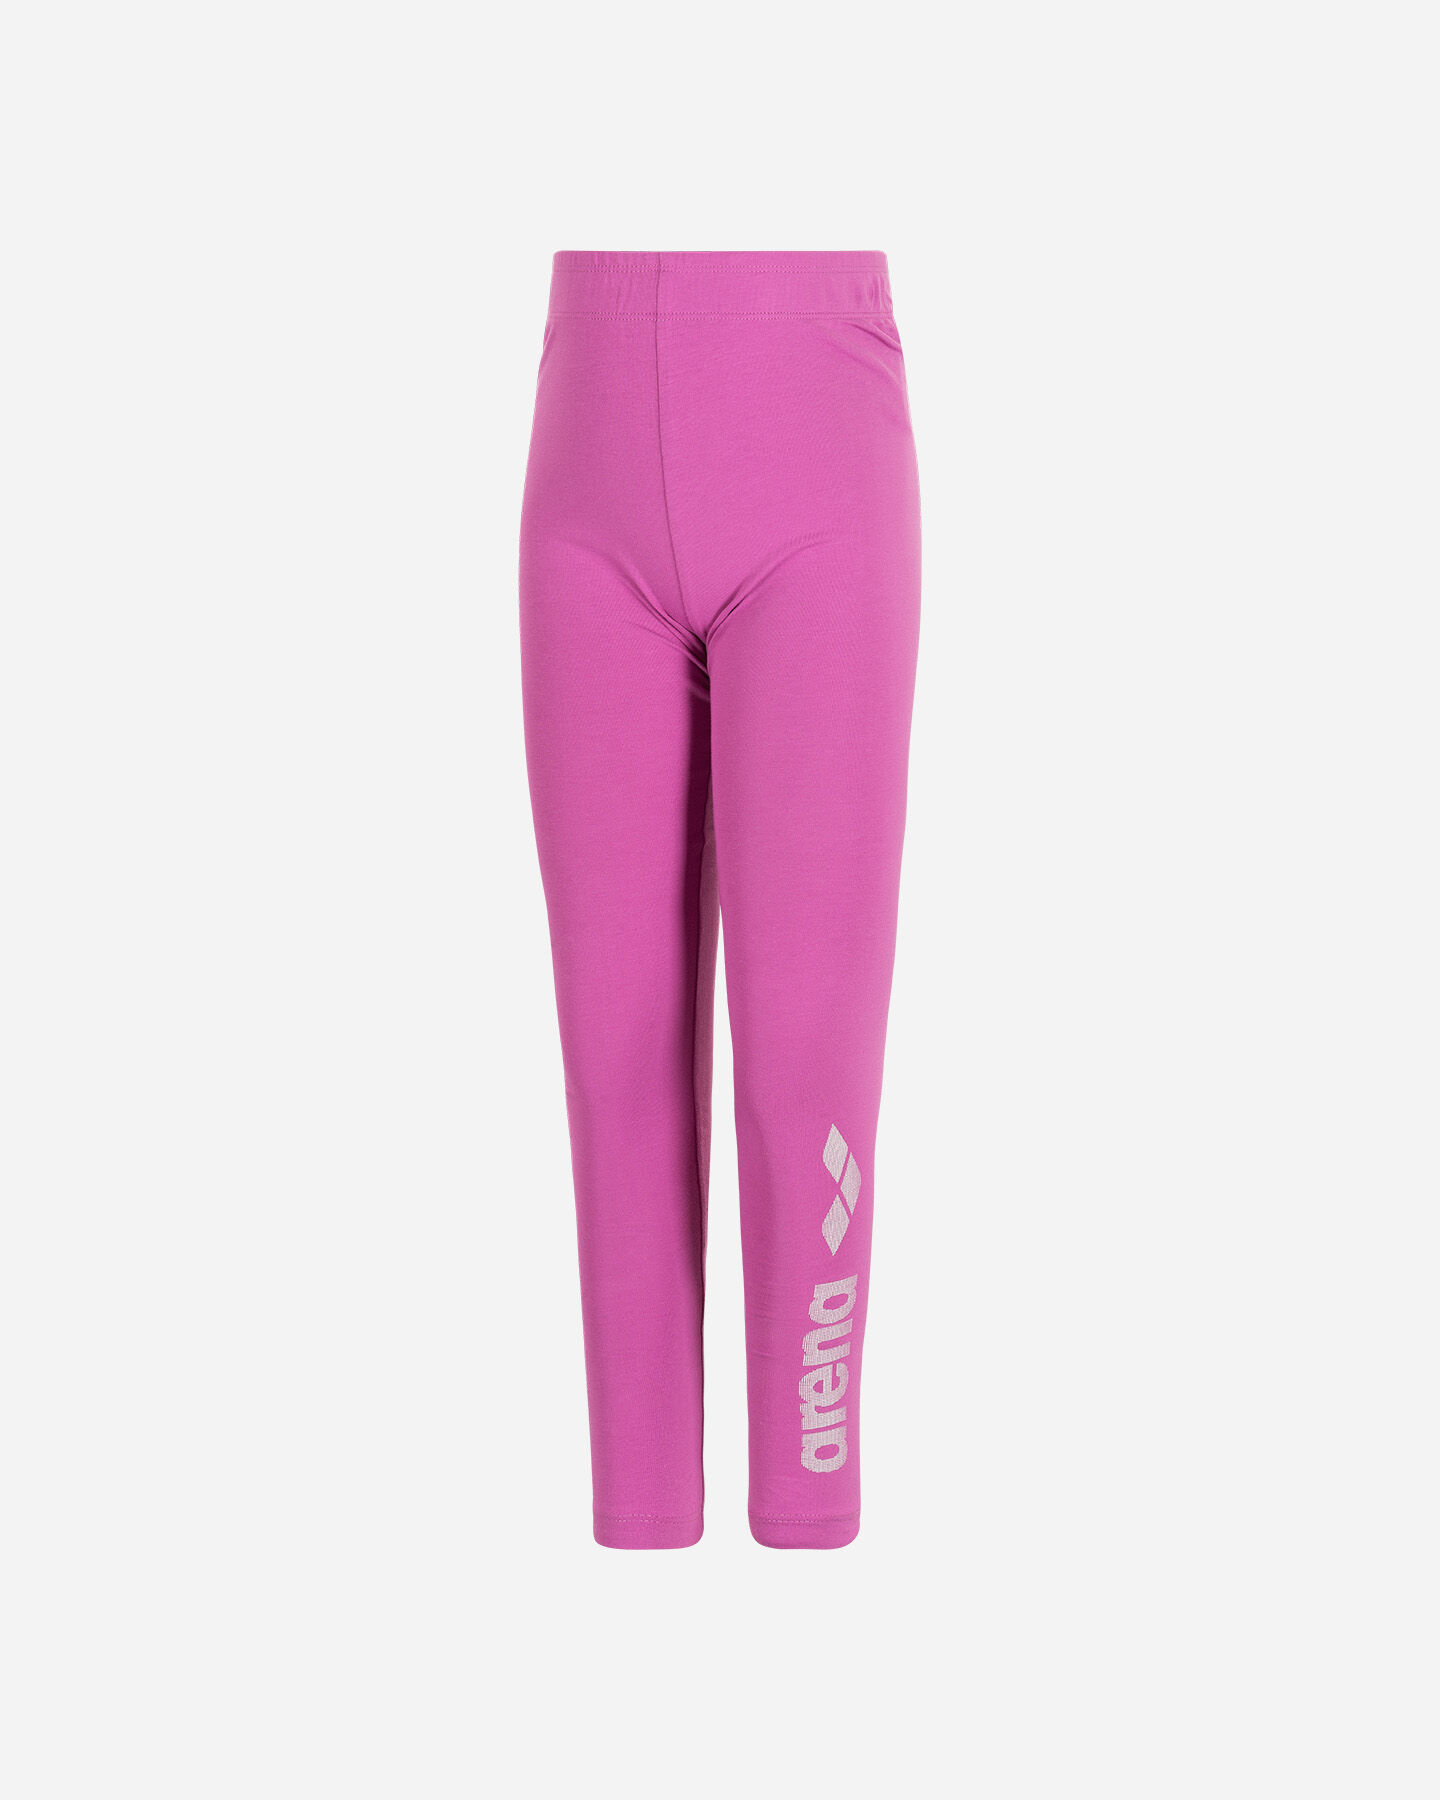  Leggings ARENA BASIC JR S4087430|393|4A scatto 0